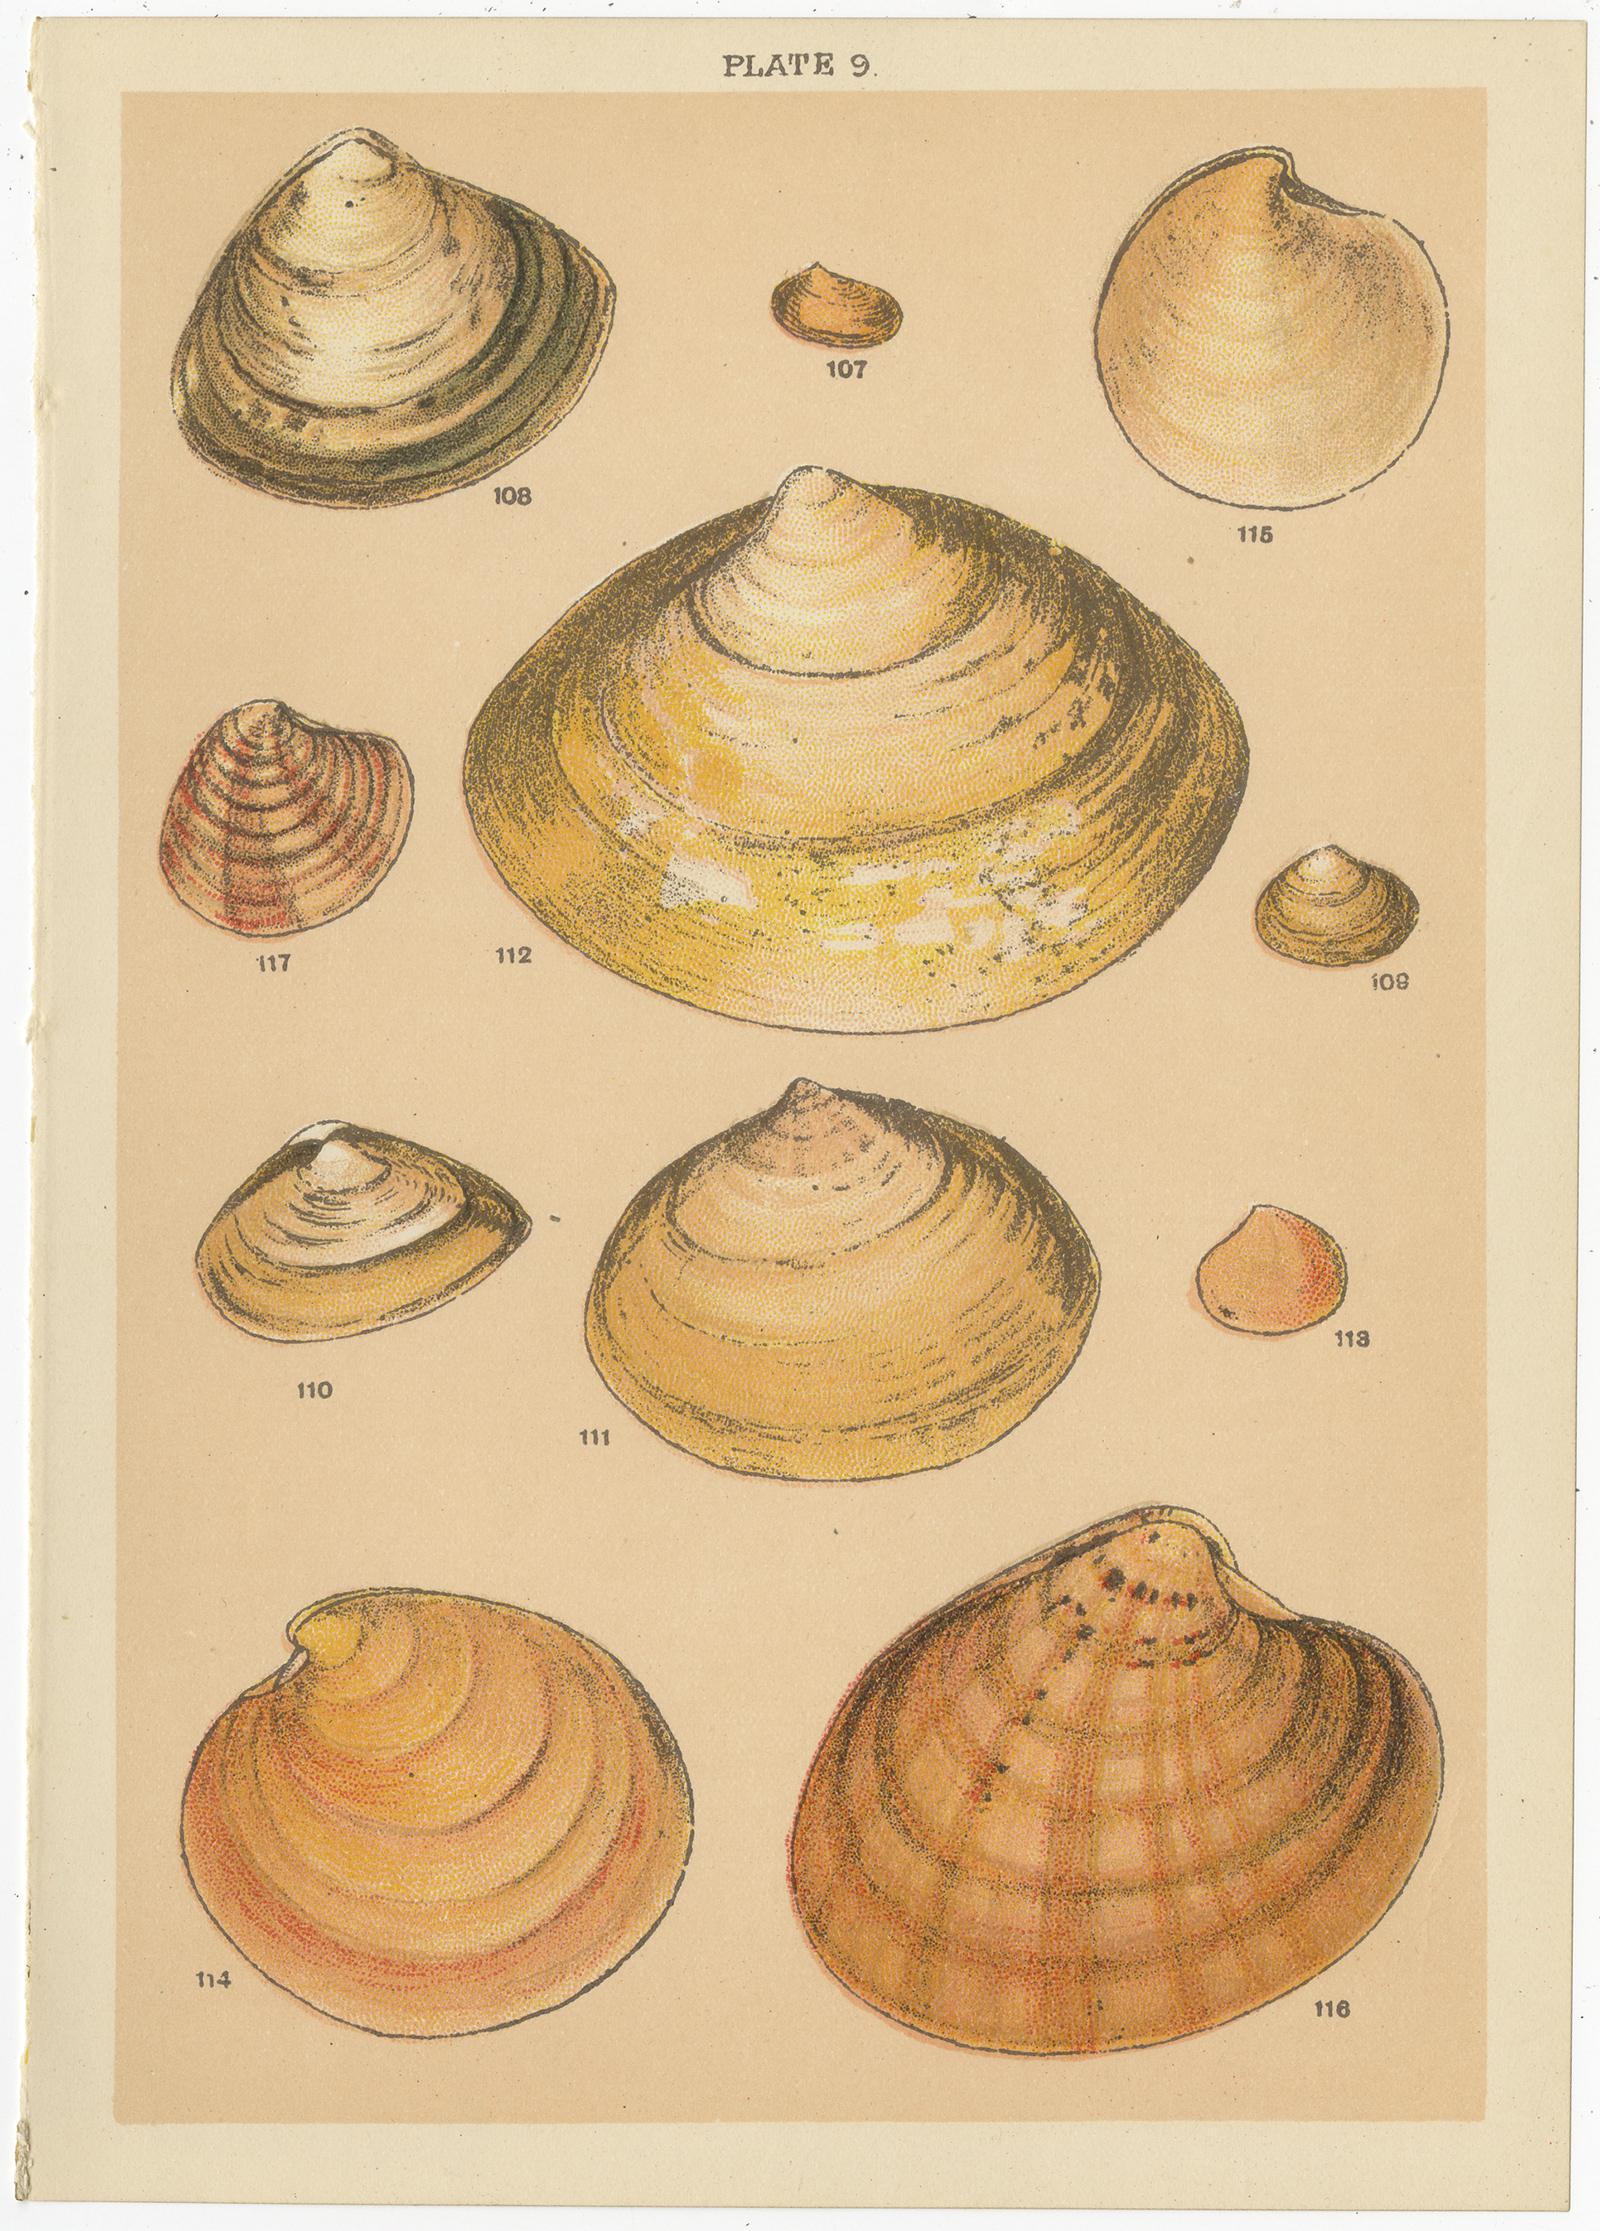 Set of 10 Antique Prints of Shells Including Molluscs by Gordon 'circa 1900' For Sale 2